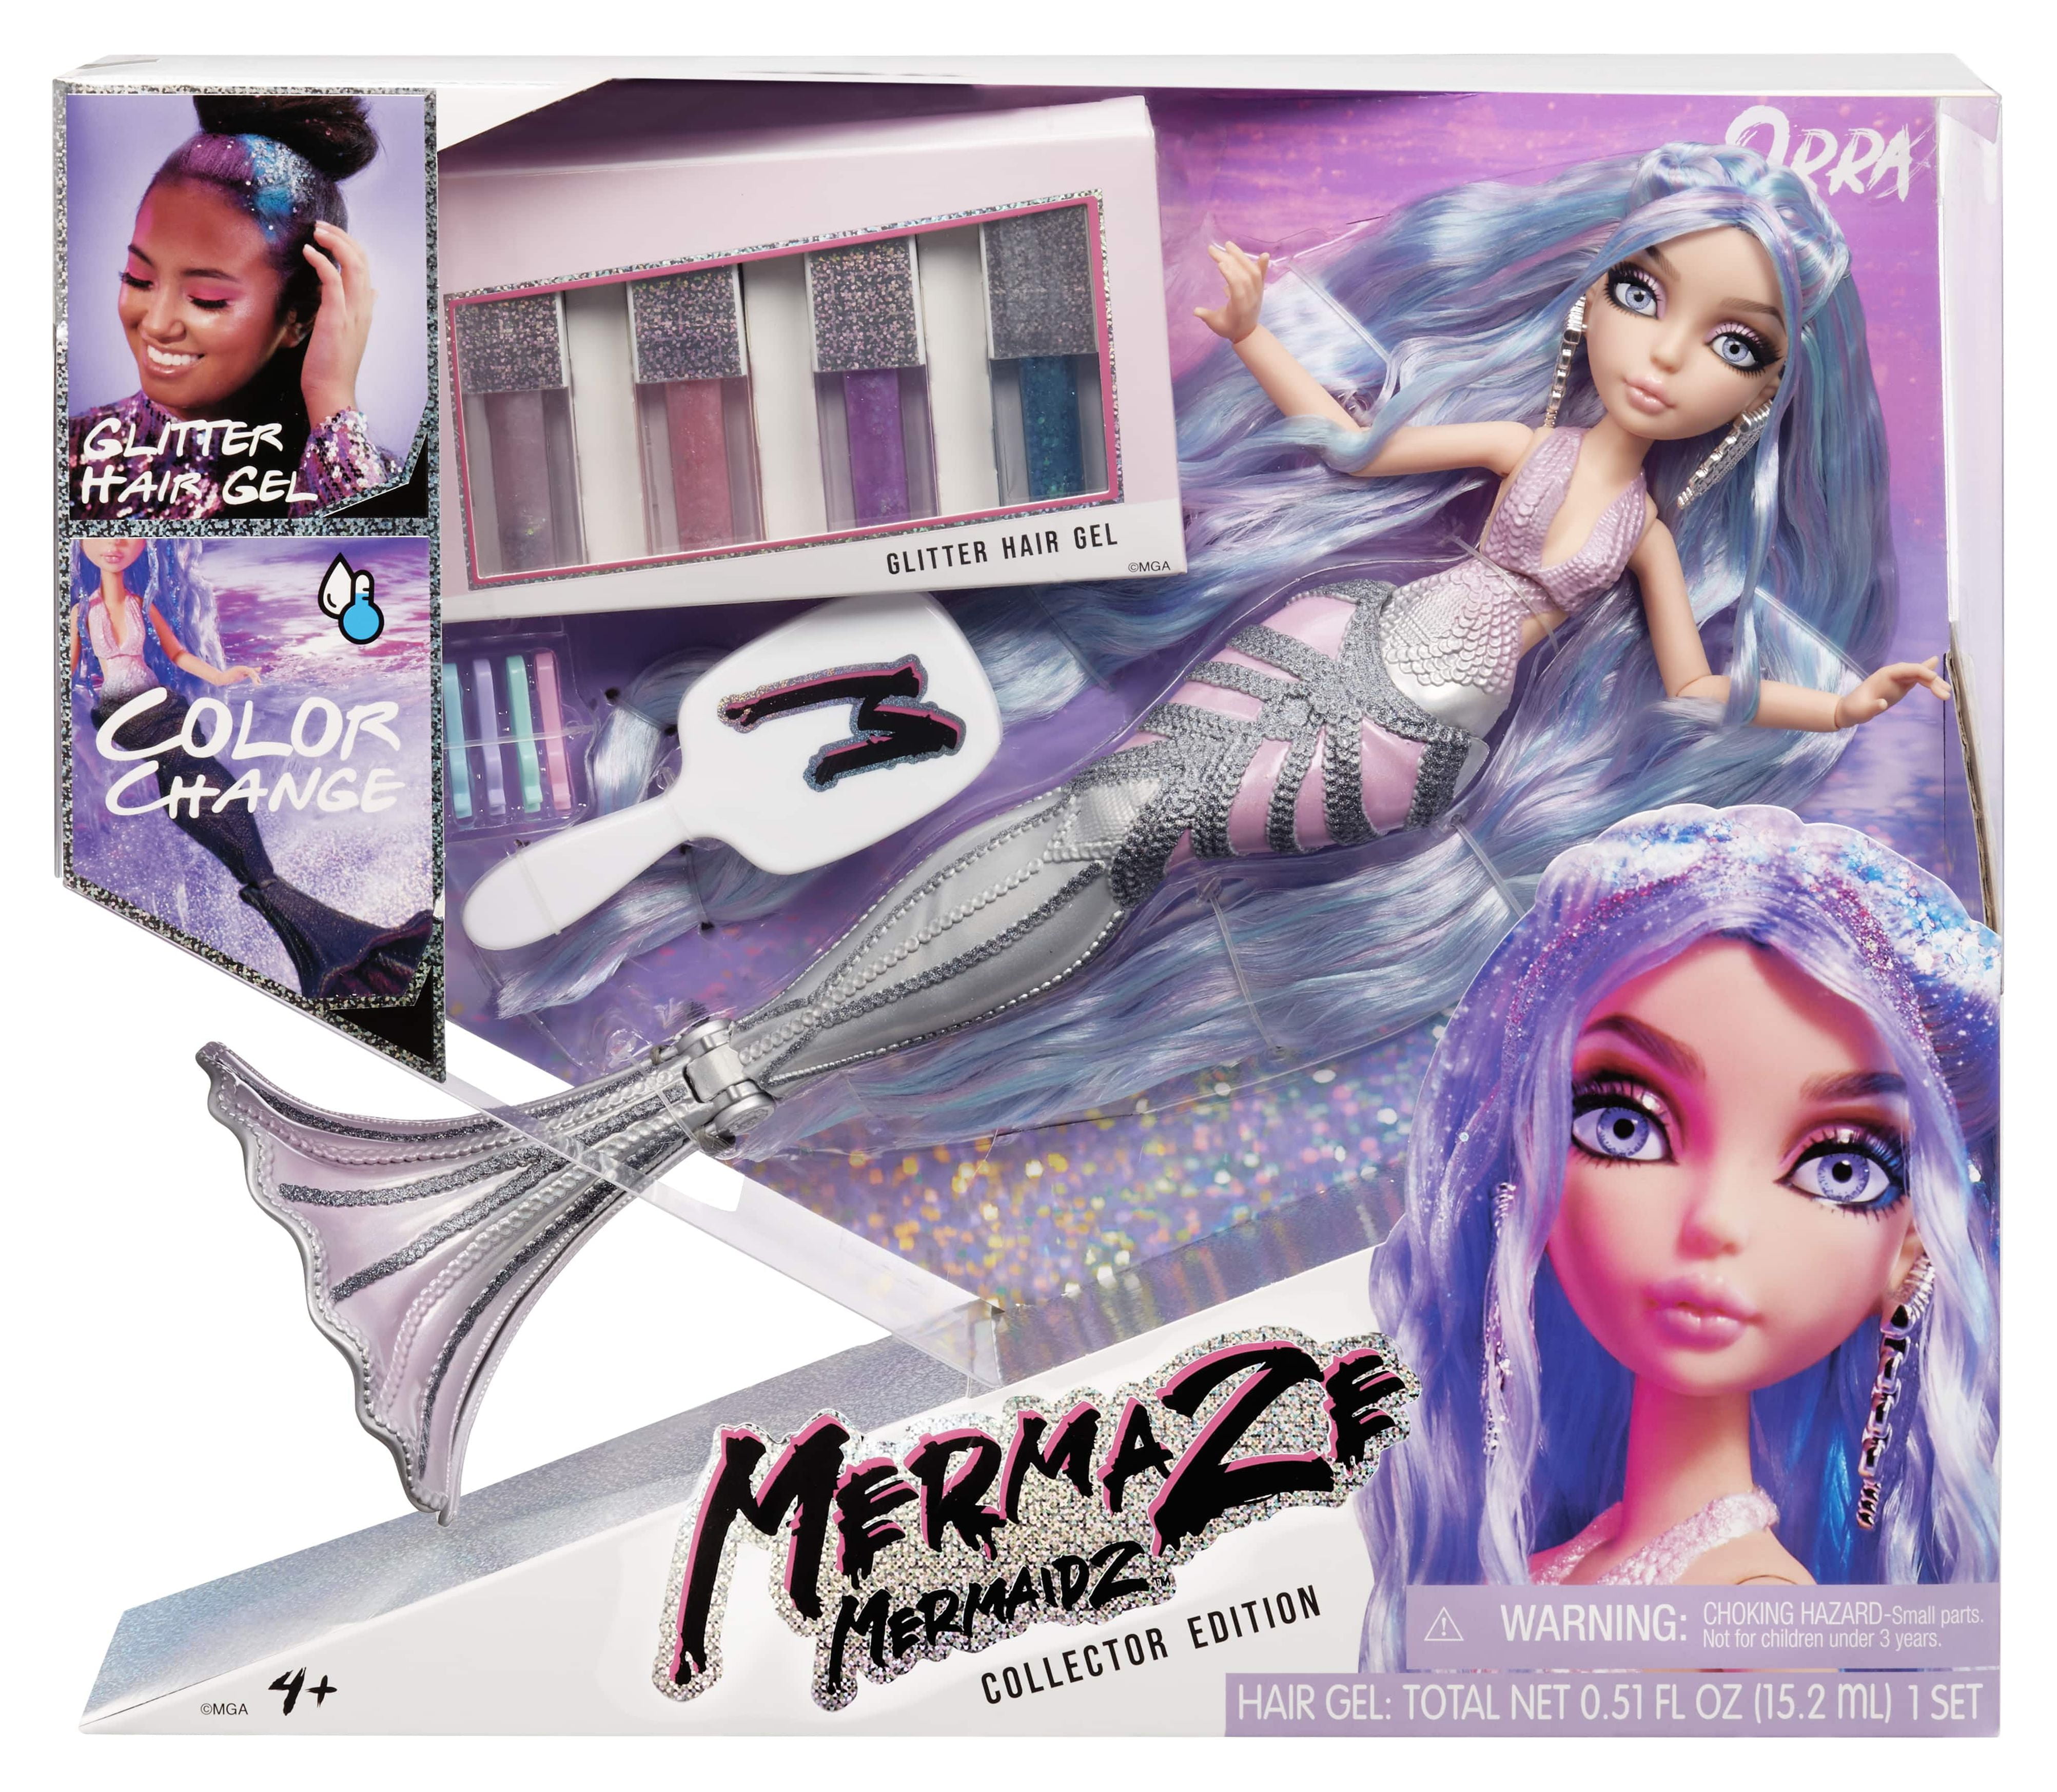 Mermaze Mermaidz Color Change Orra Deluxe Fashion Doll with Wear and Share  Hair Play